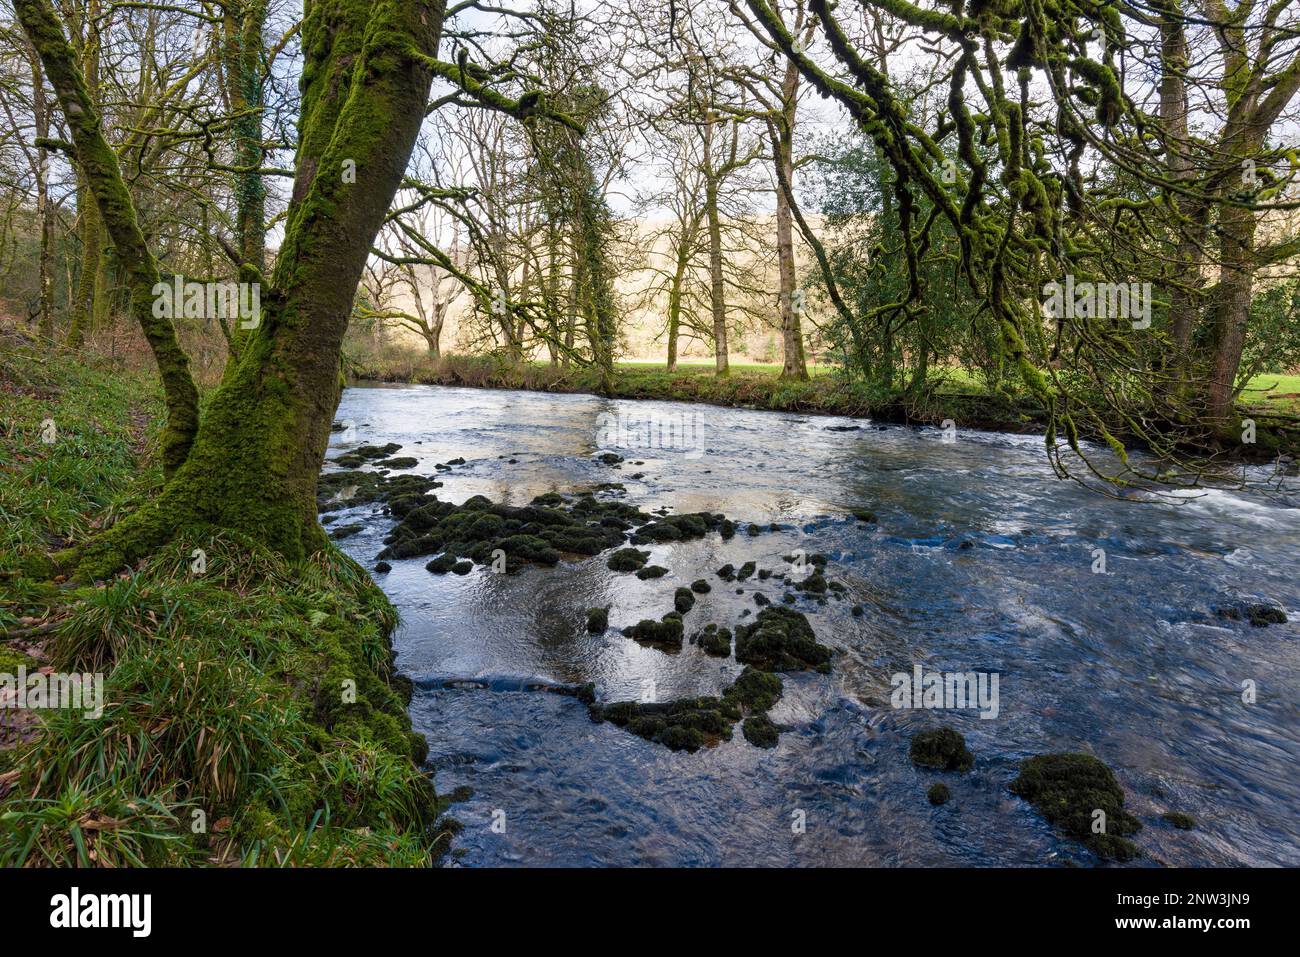 The River Barle alongside Syds Wood in winter near Dulverton in the Exmoor National Park, Somerset, England. Stock Photo